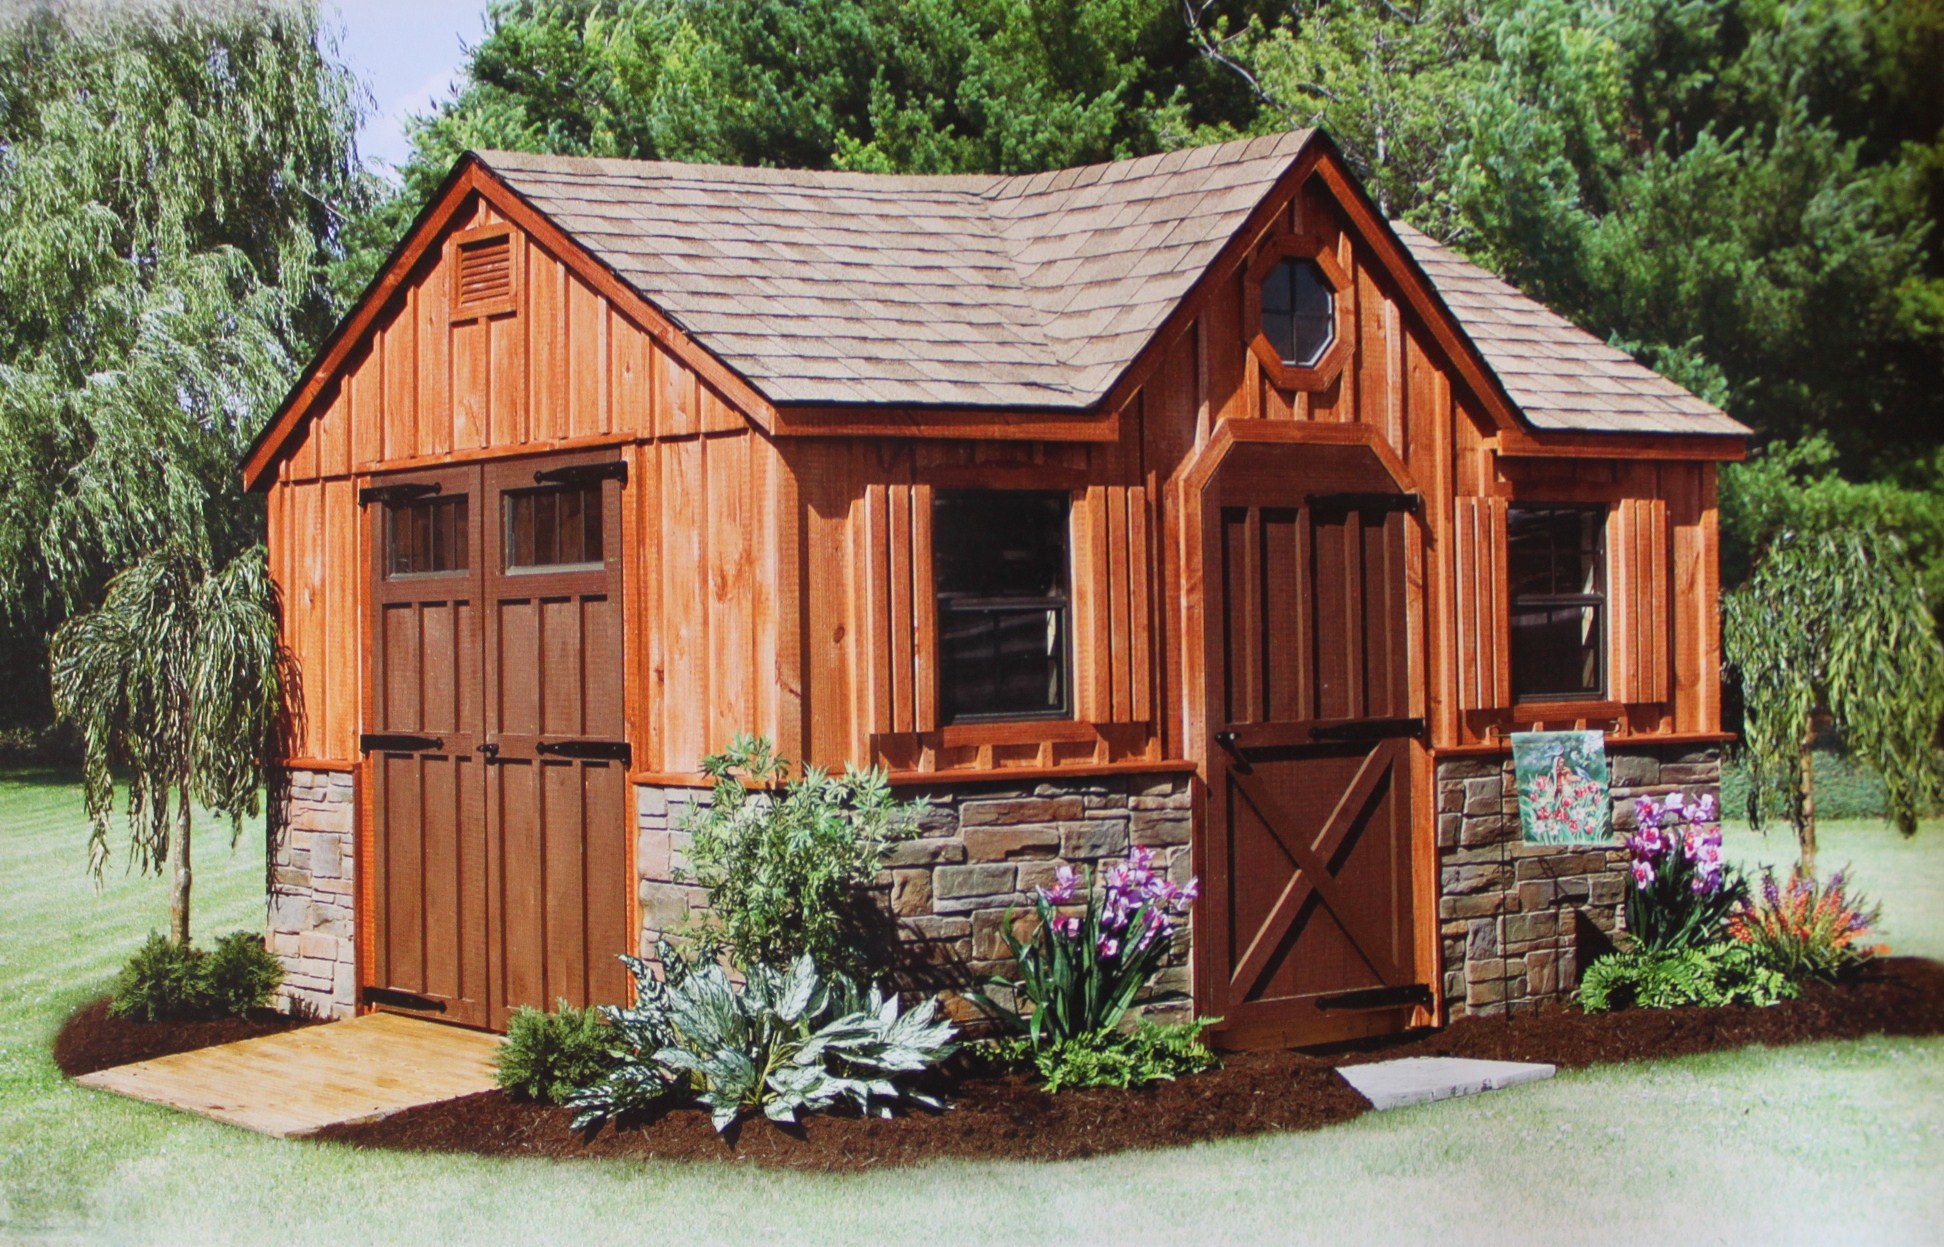 Storage Sheds, 1-2 Car Garages, Playhouses, Board and Batten Sheds, and